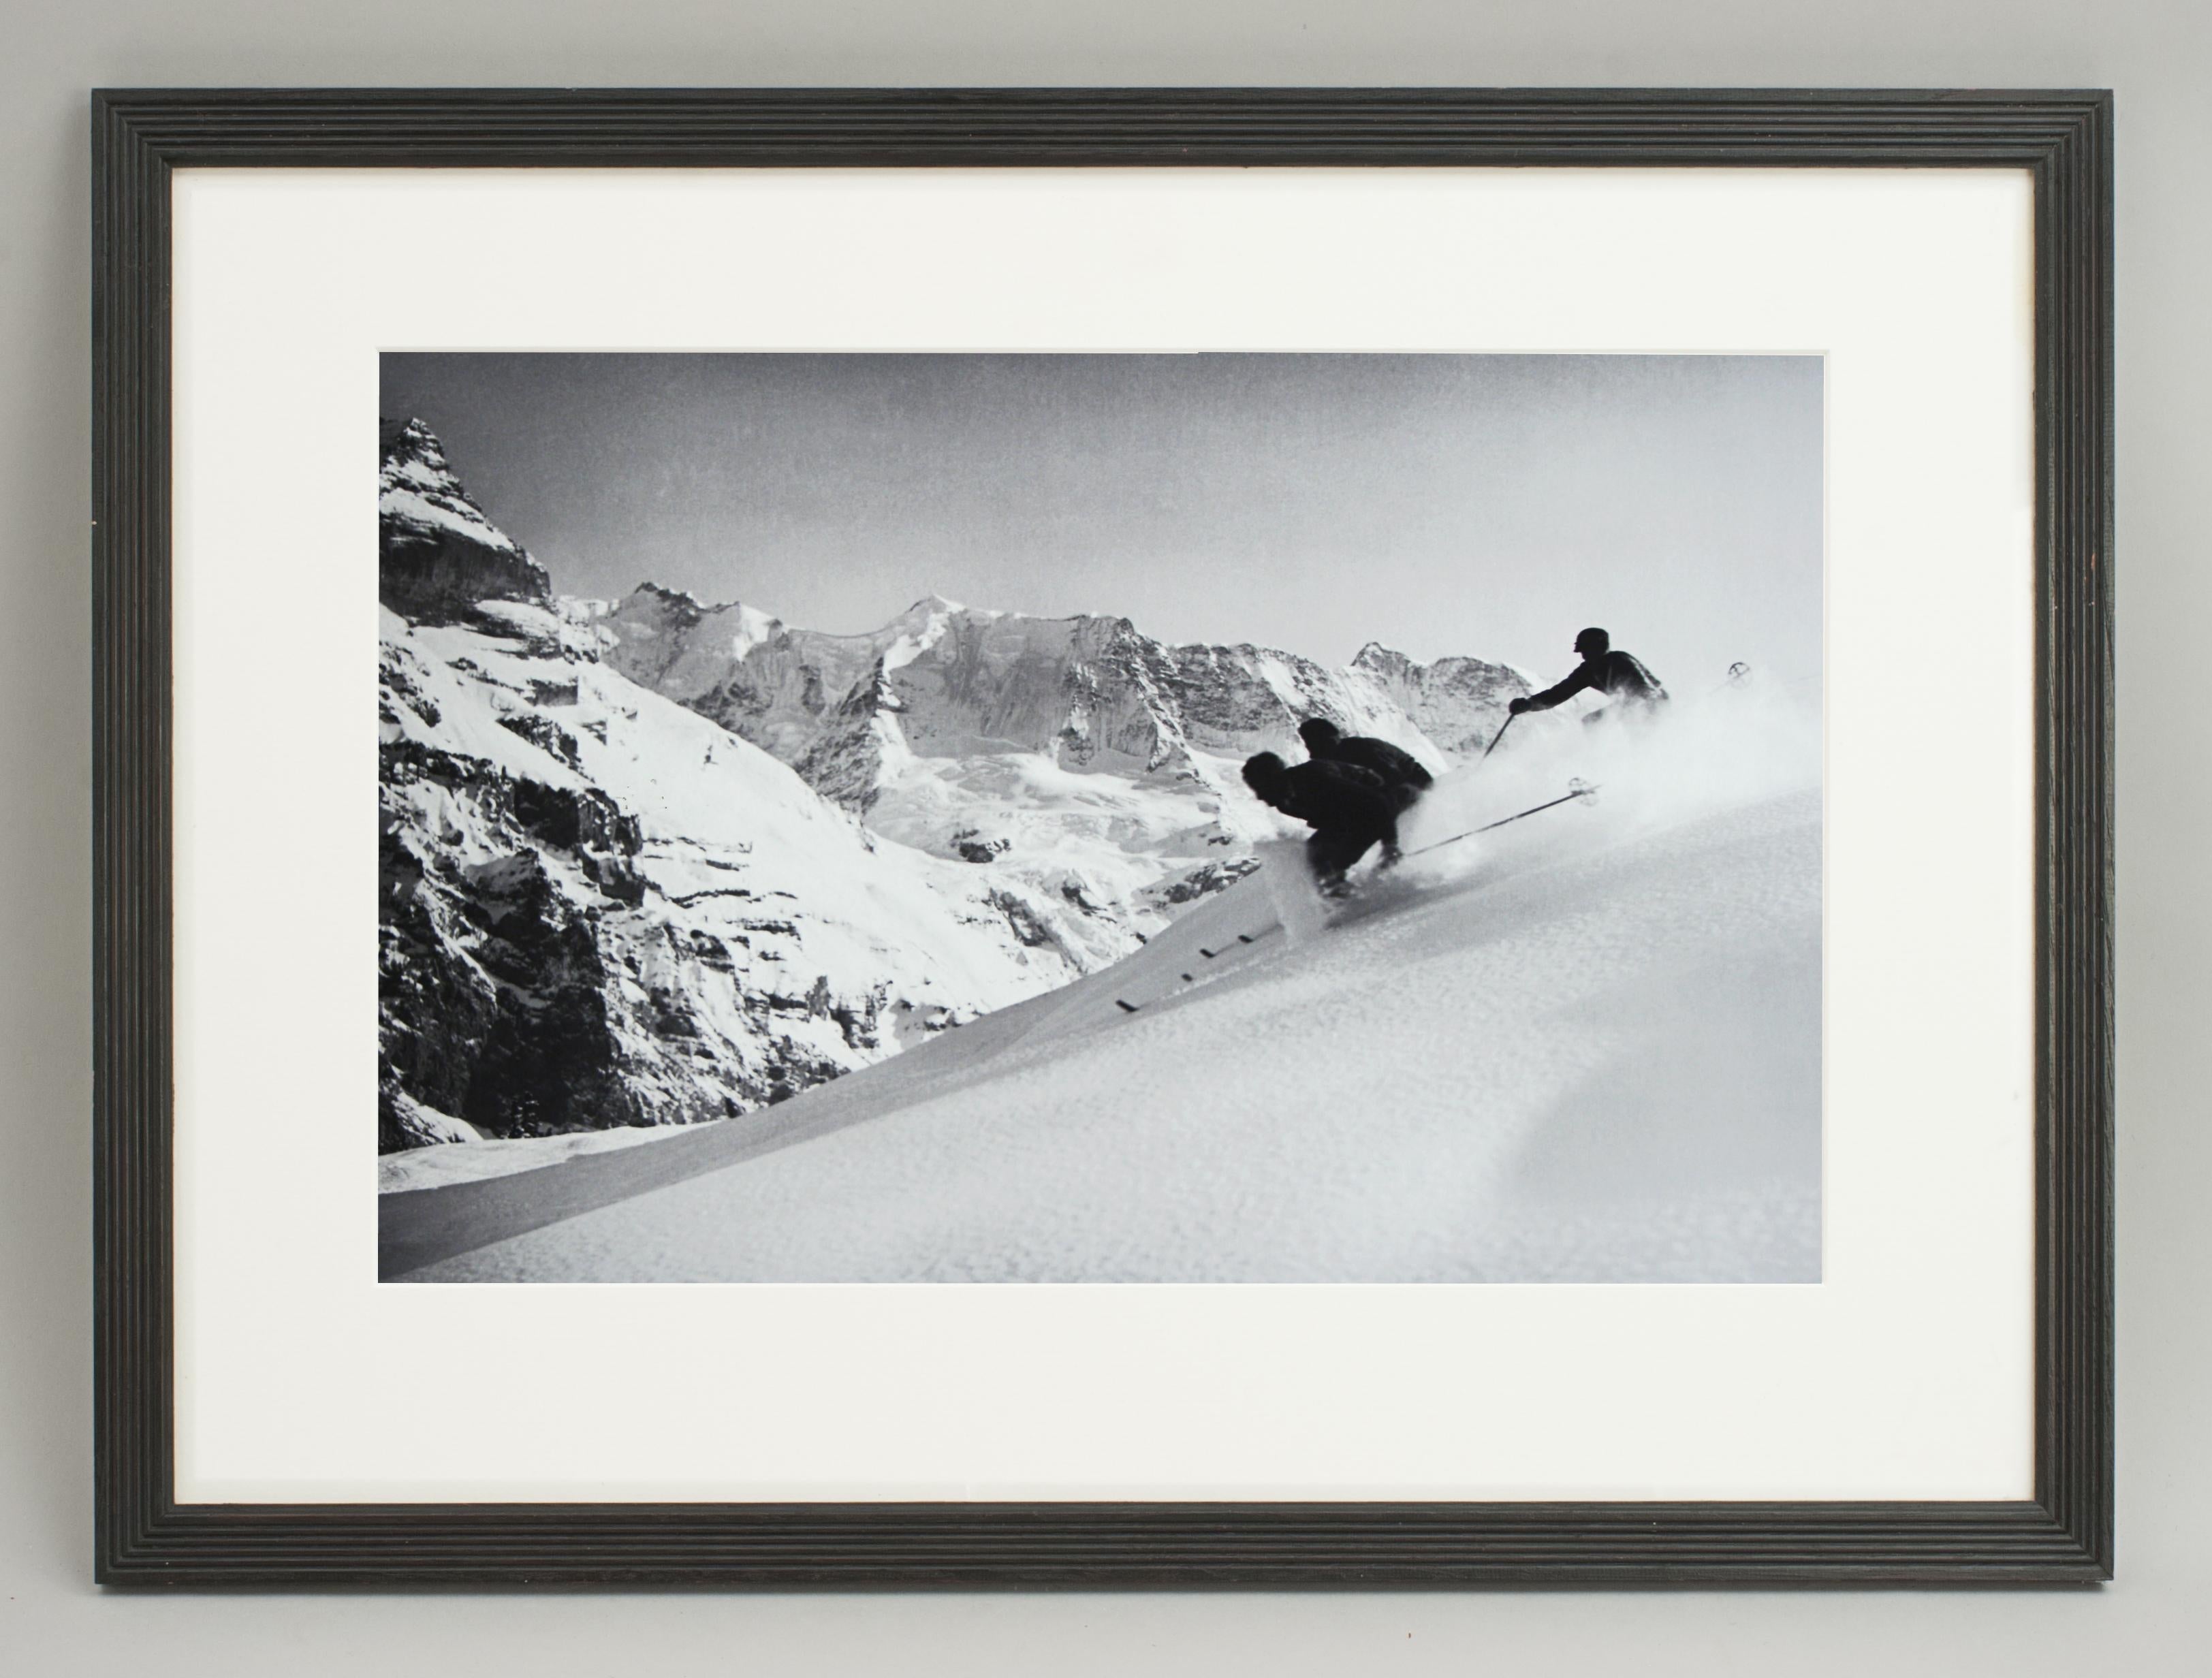 'SCHUSS' Murren, Switzerland, a framed and mounted black and white photographic image after an original 1930s skiing photograph. The frame is a hand colored reeded wooden black frame. Black and white alpine photos are the perfect addition to any